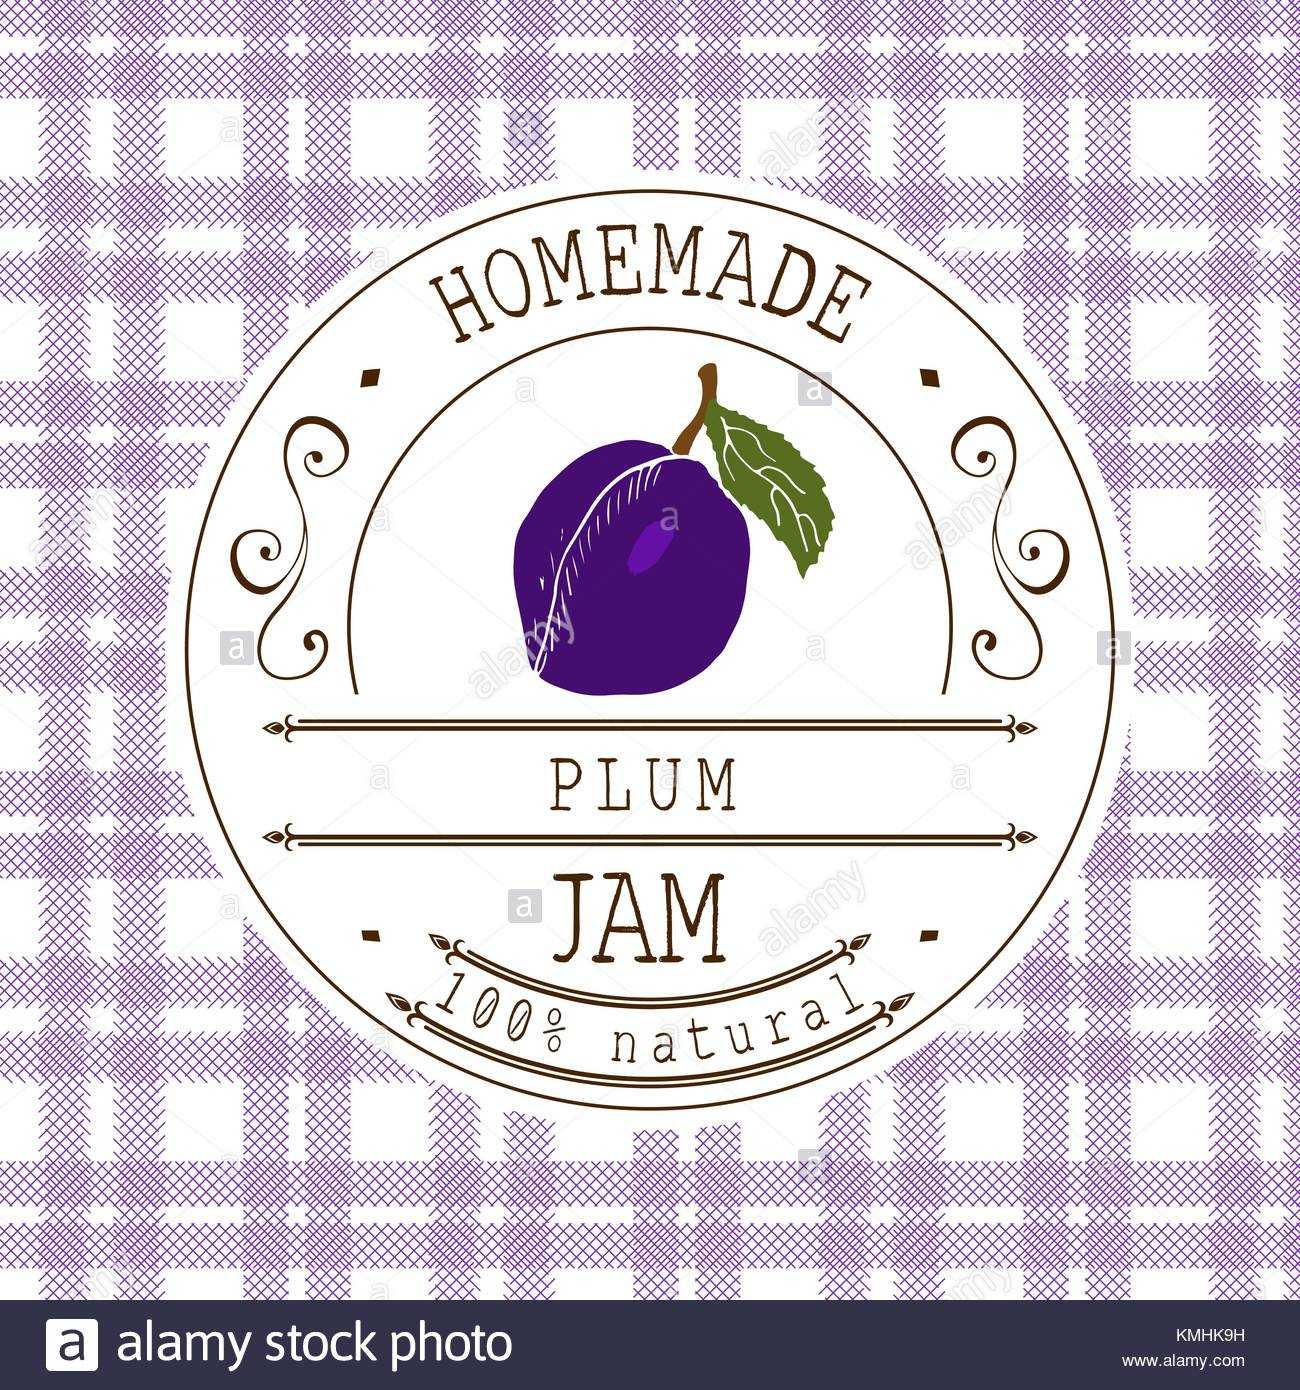 Jam Label Design Template. For Plum Dessert Product With Pertaining To Dessert Labels Template